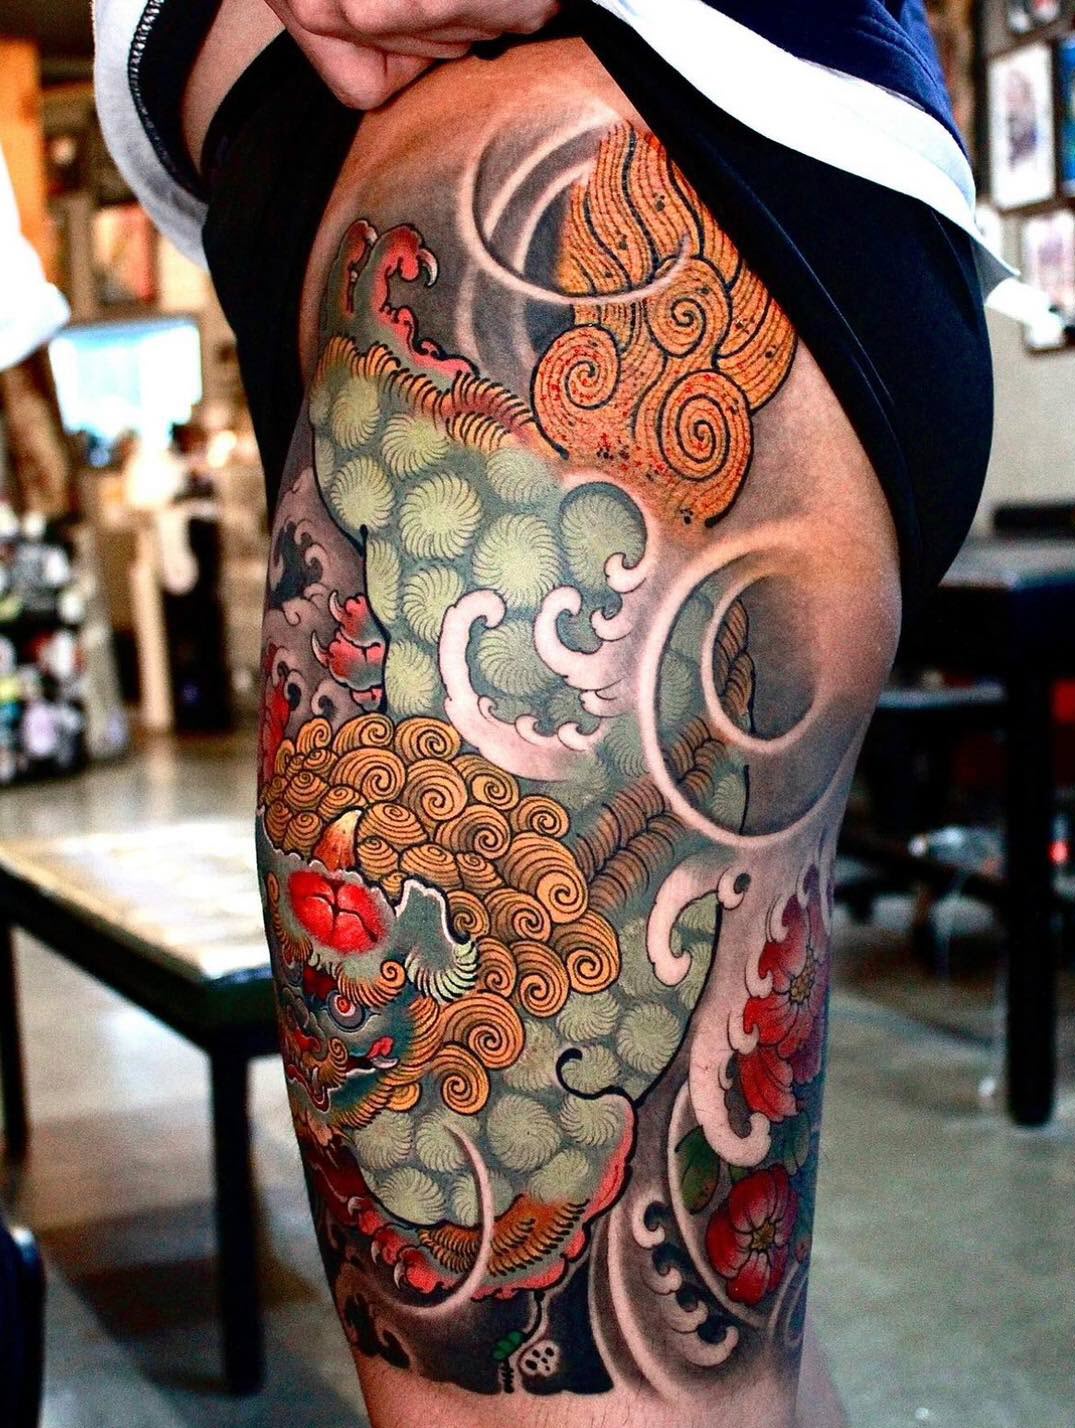 Japanese toad tattoo located on the calf.